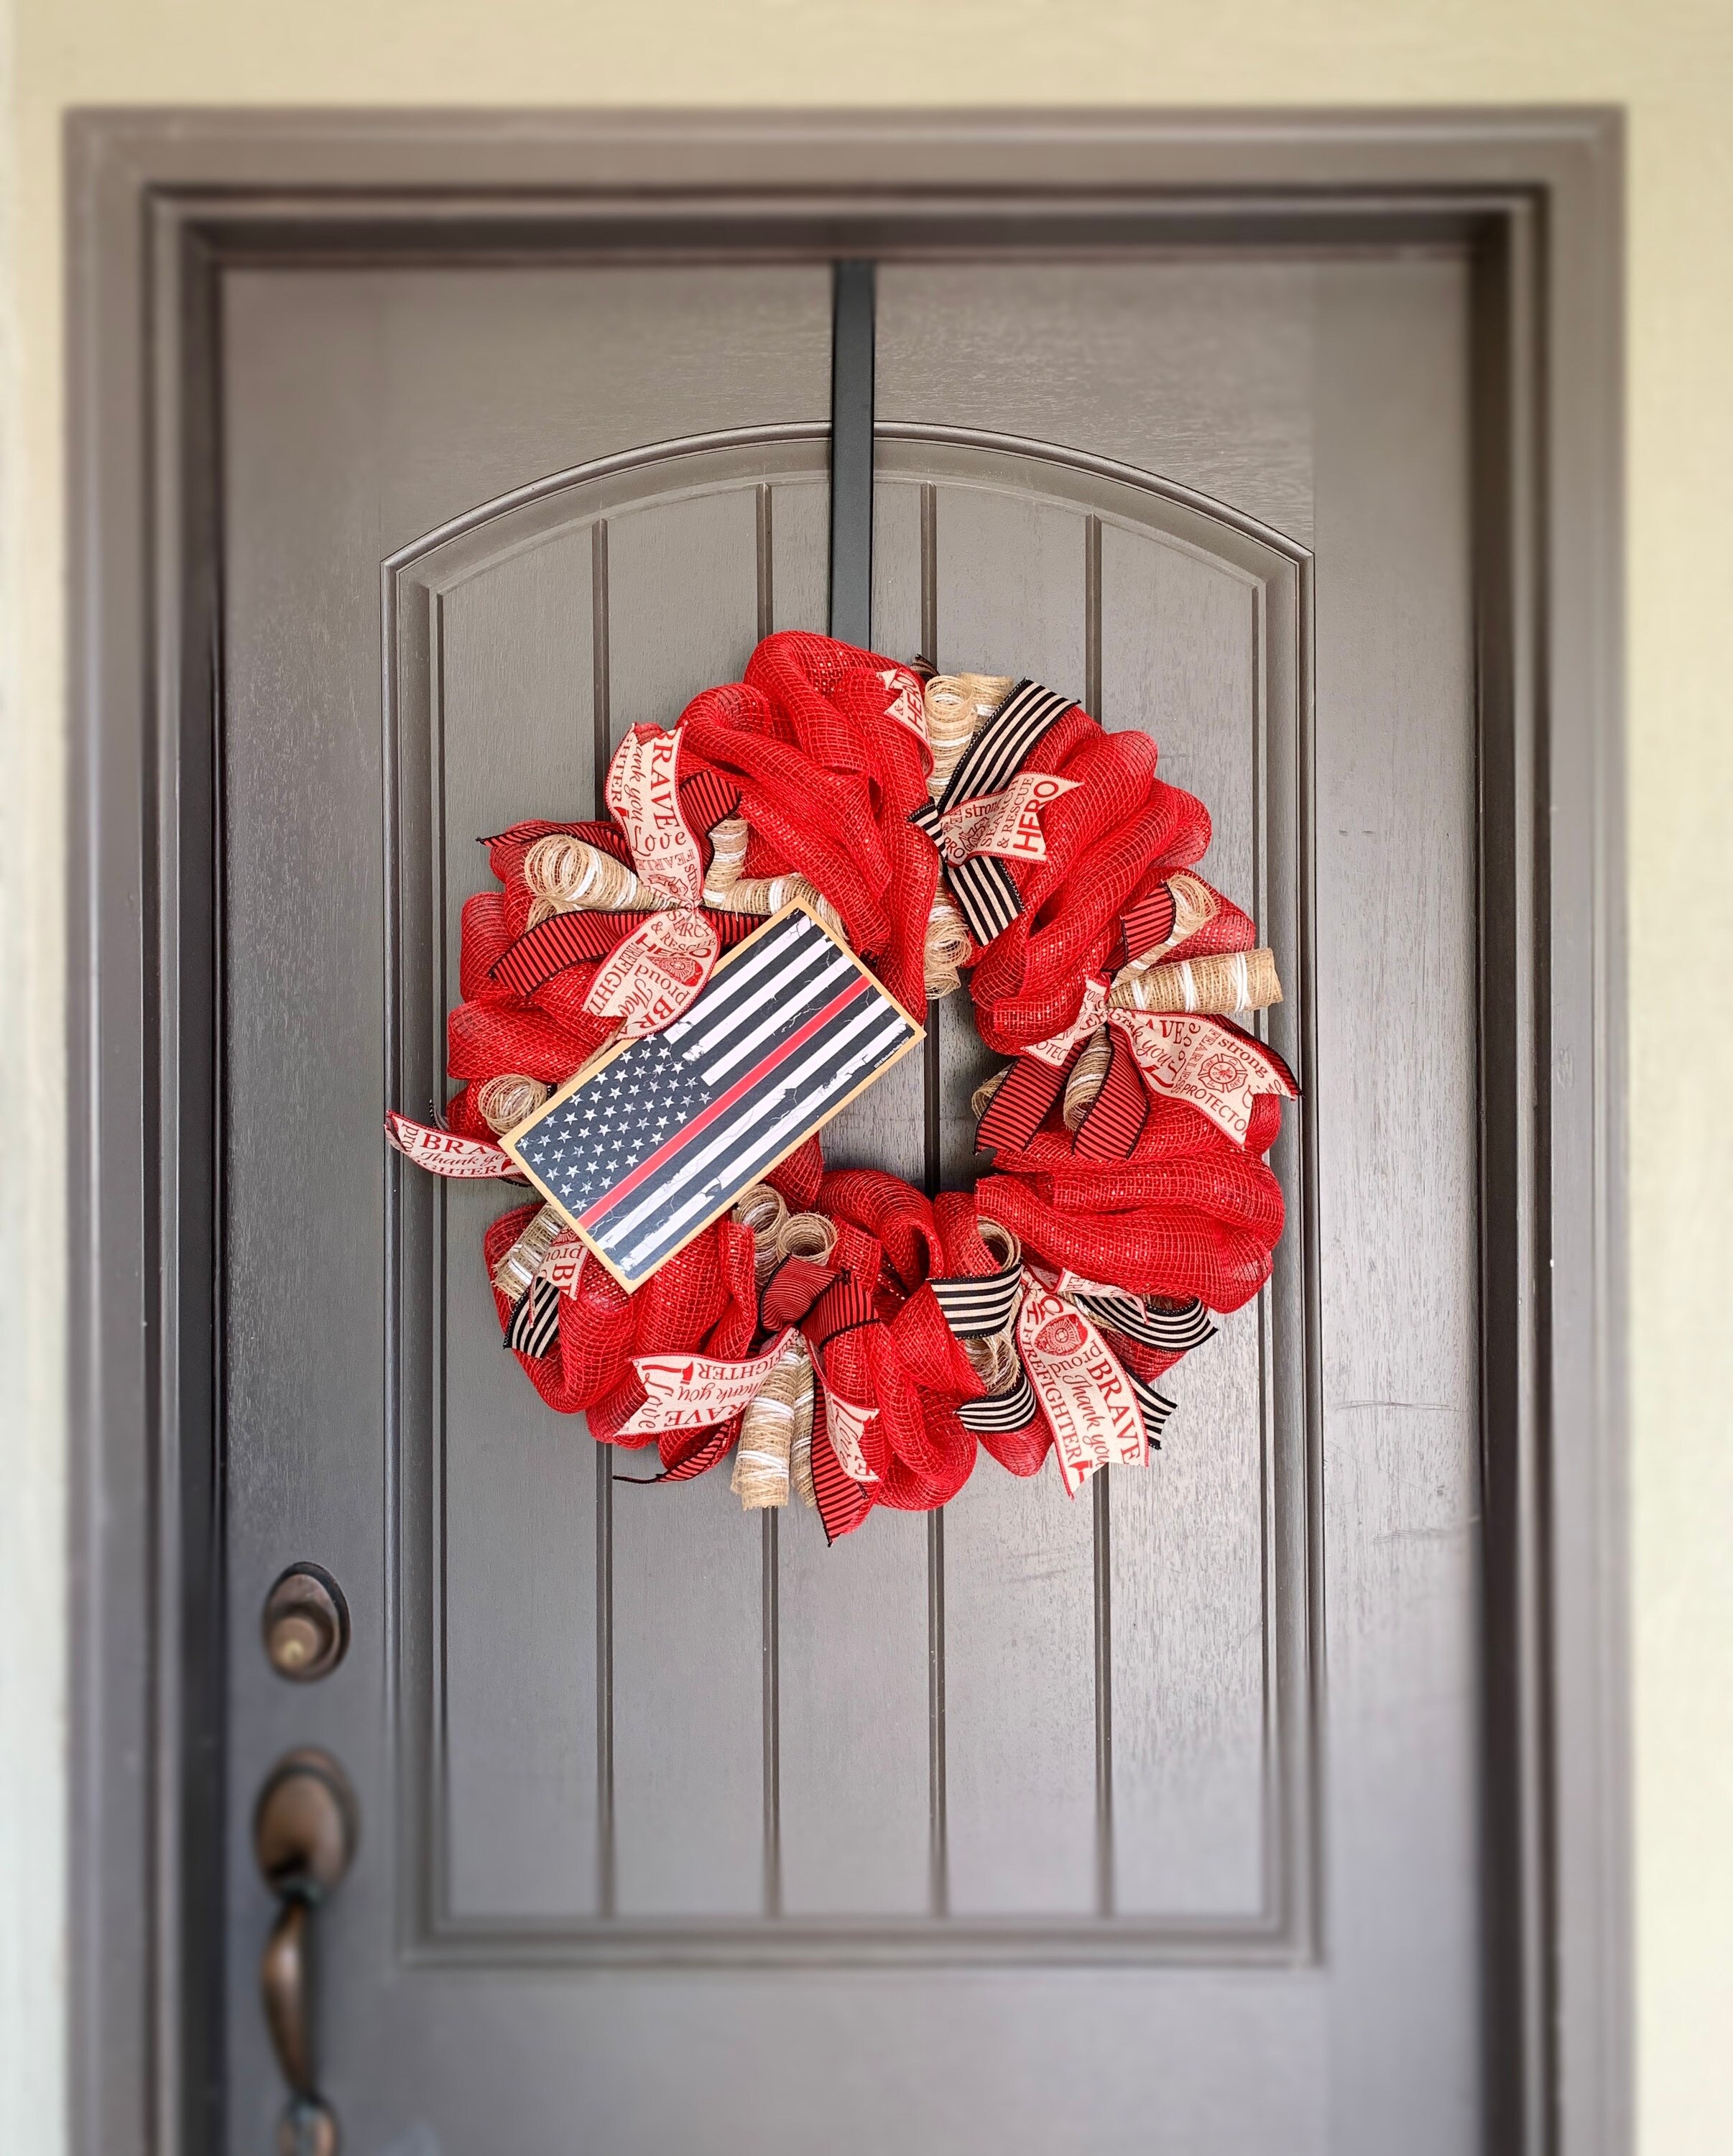 Firefighter SupportWreath Everyday Wreath Wreath for Front Door Front Door Wreath Everyday Wreath Gift Support Firemen Support Wreath